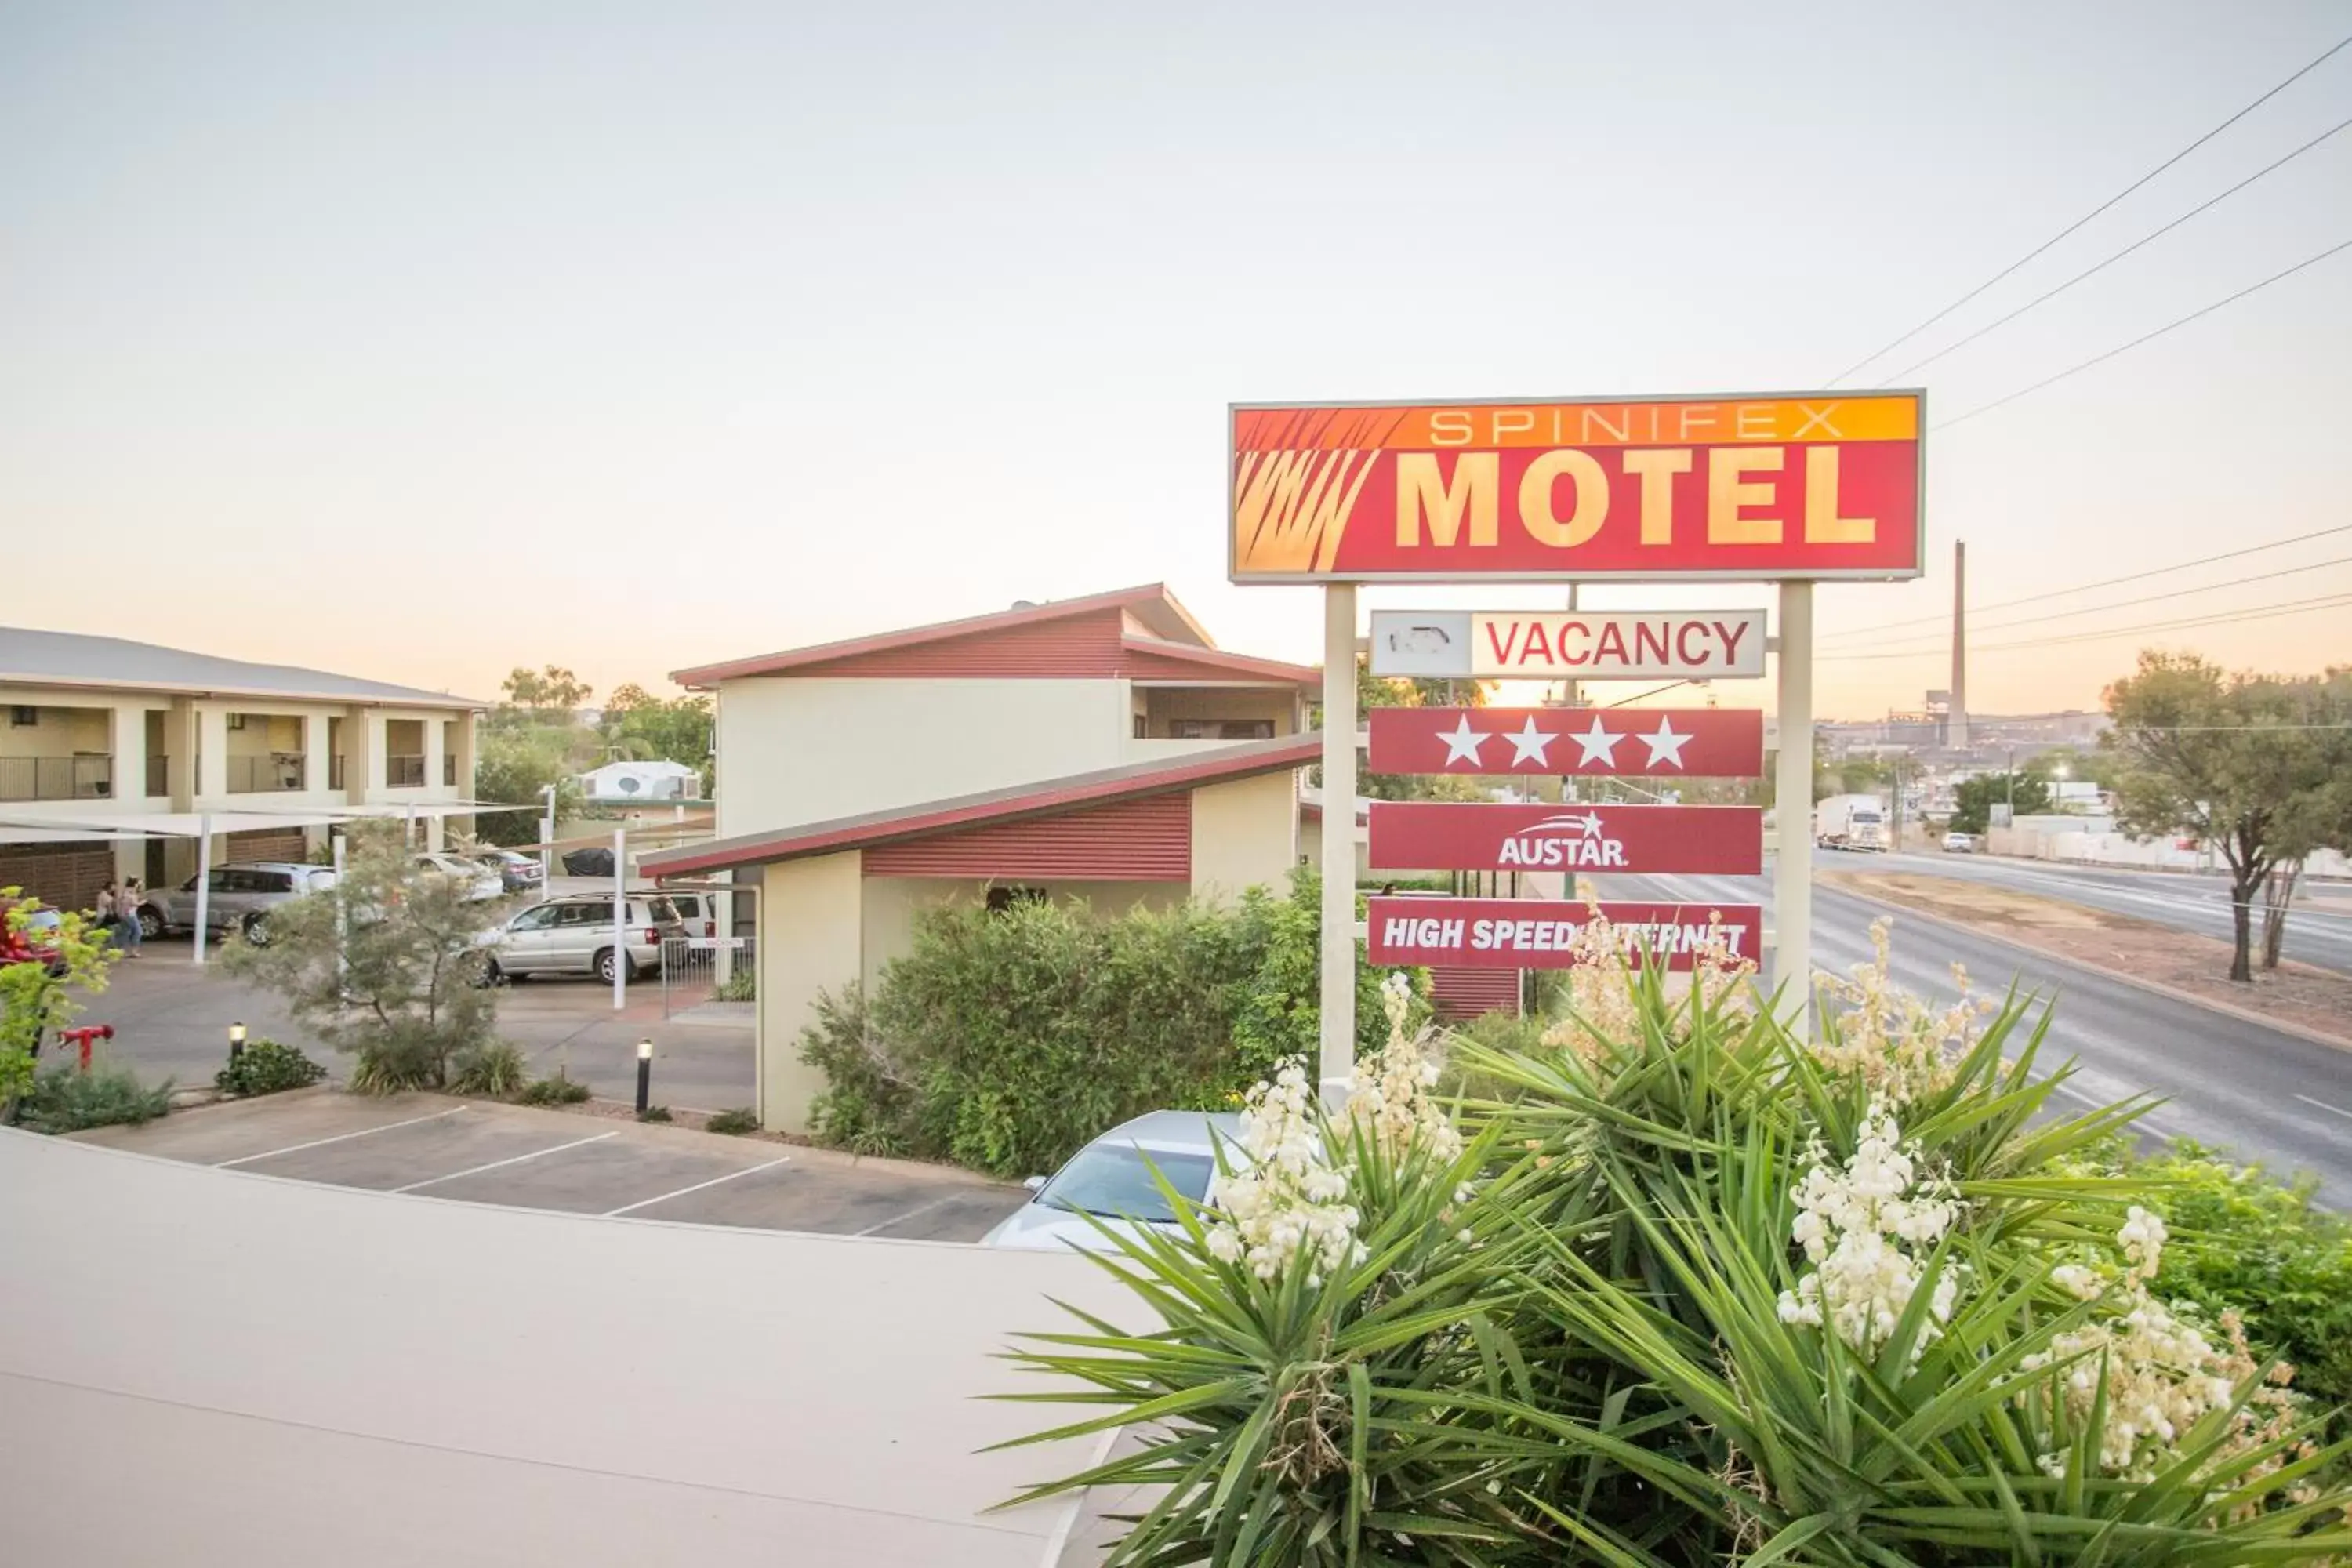 Area and facilities, Property Building in Spinifex Motel and Serviced Apartments